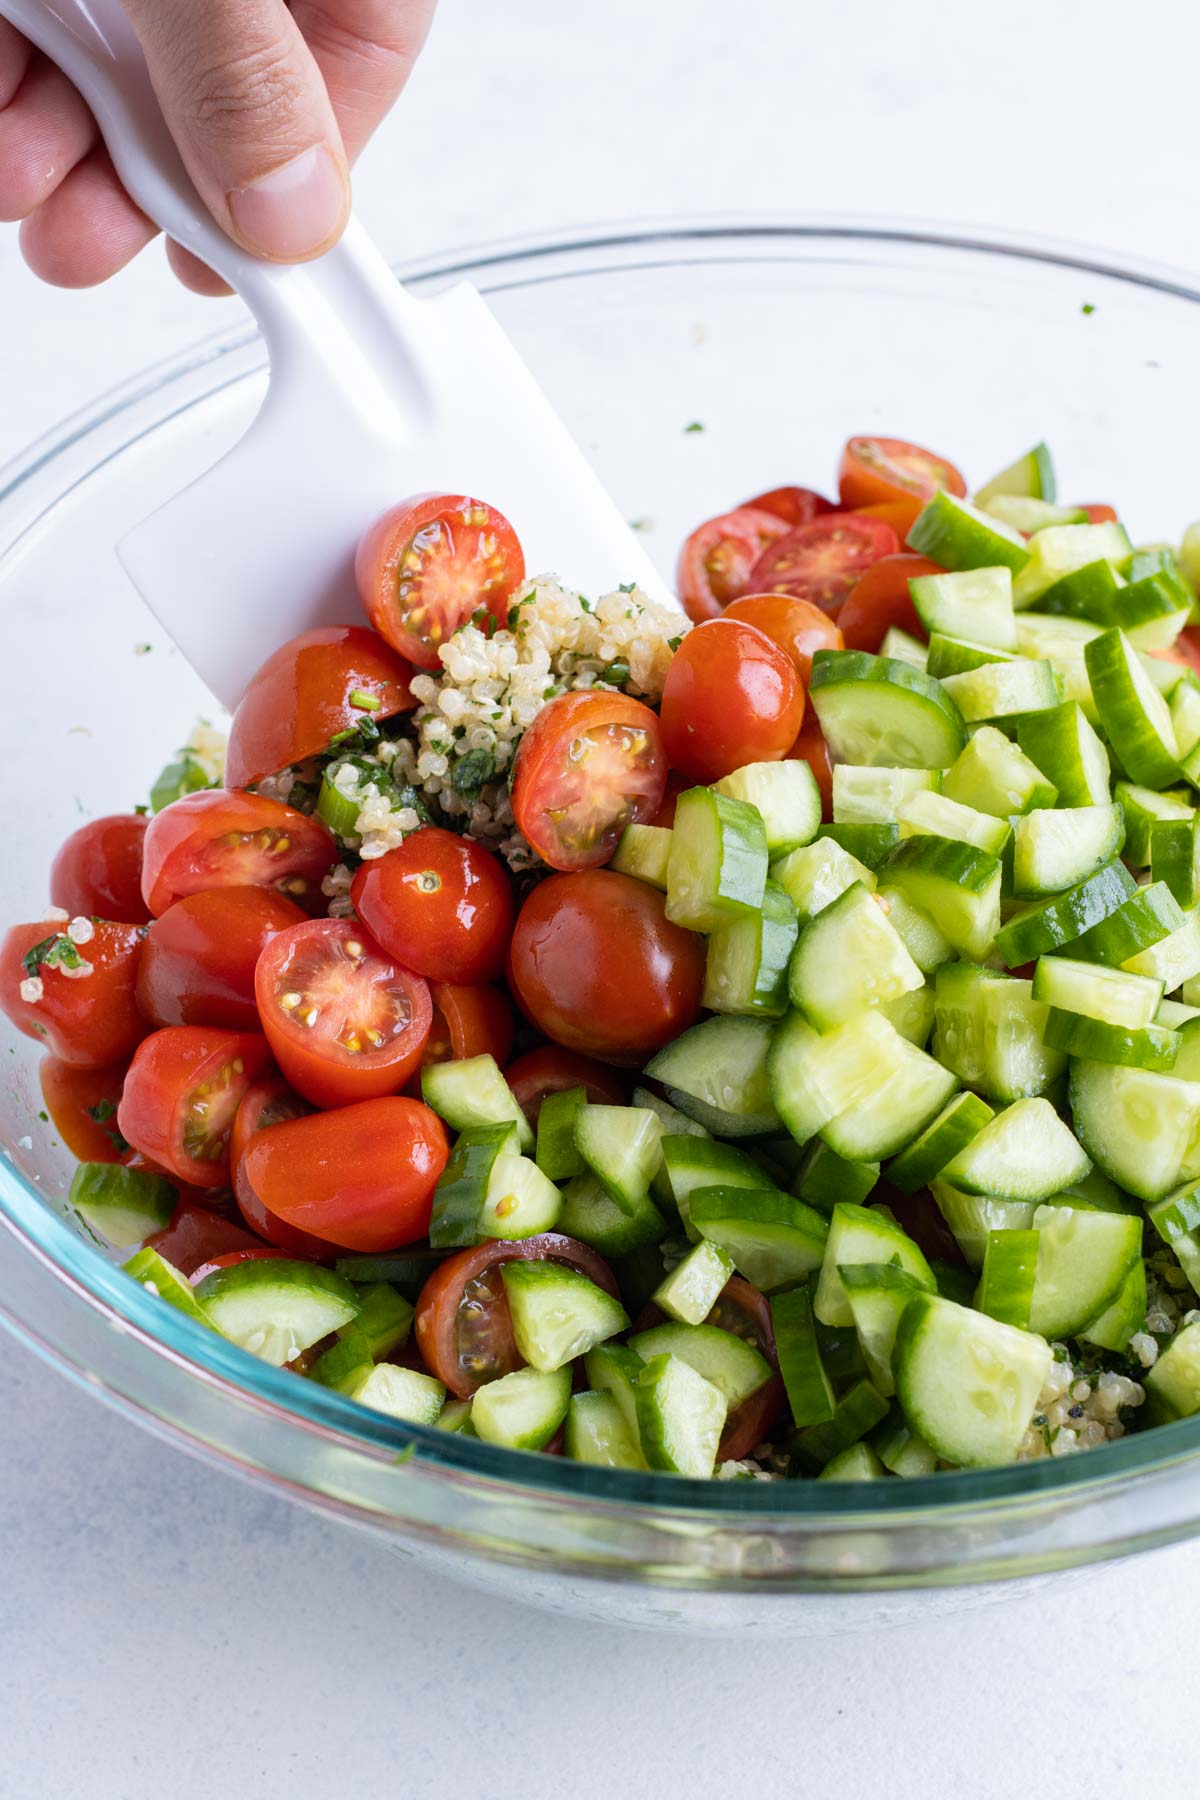 Tomatoes and cucumbers are added to the quinoa salad.